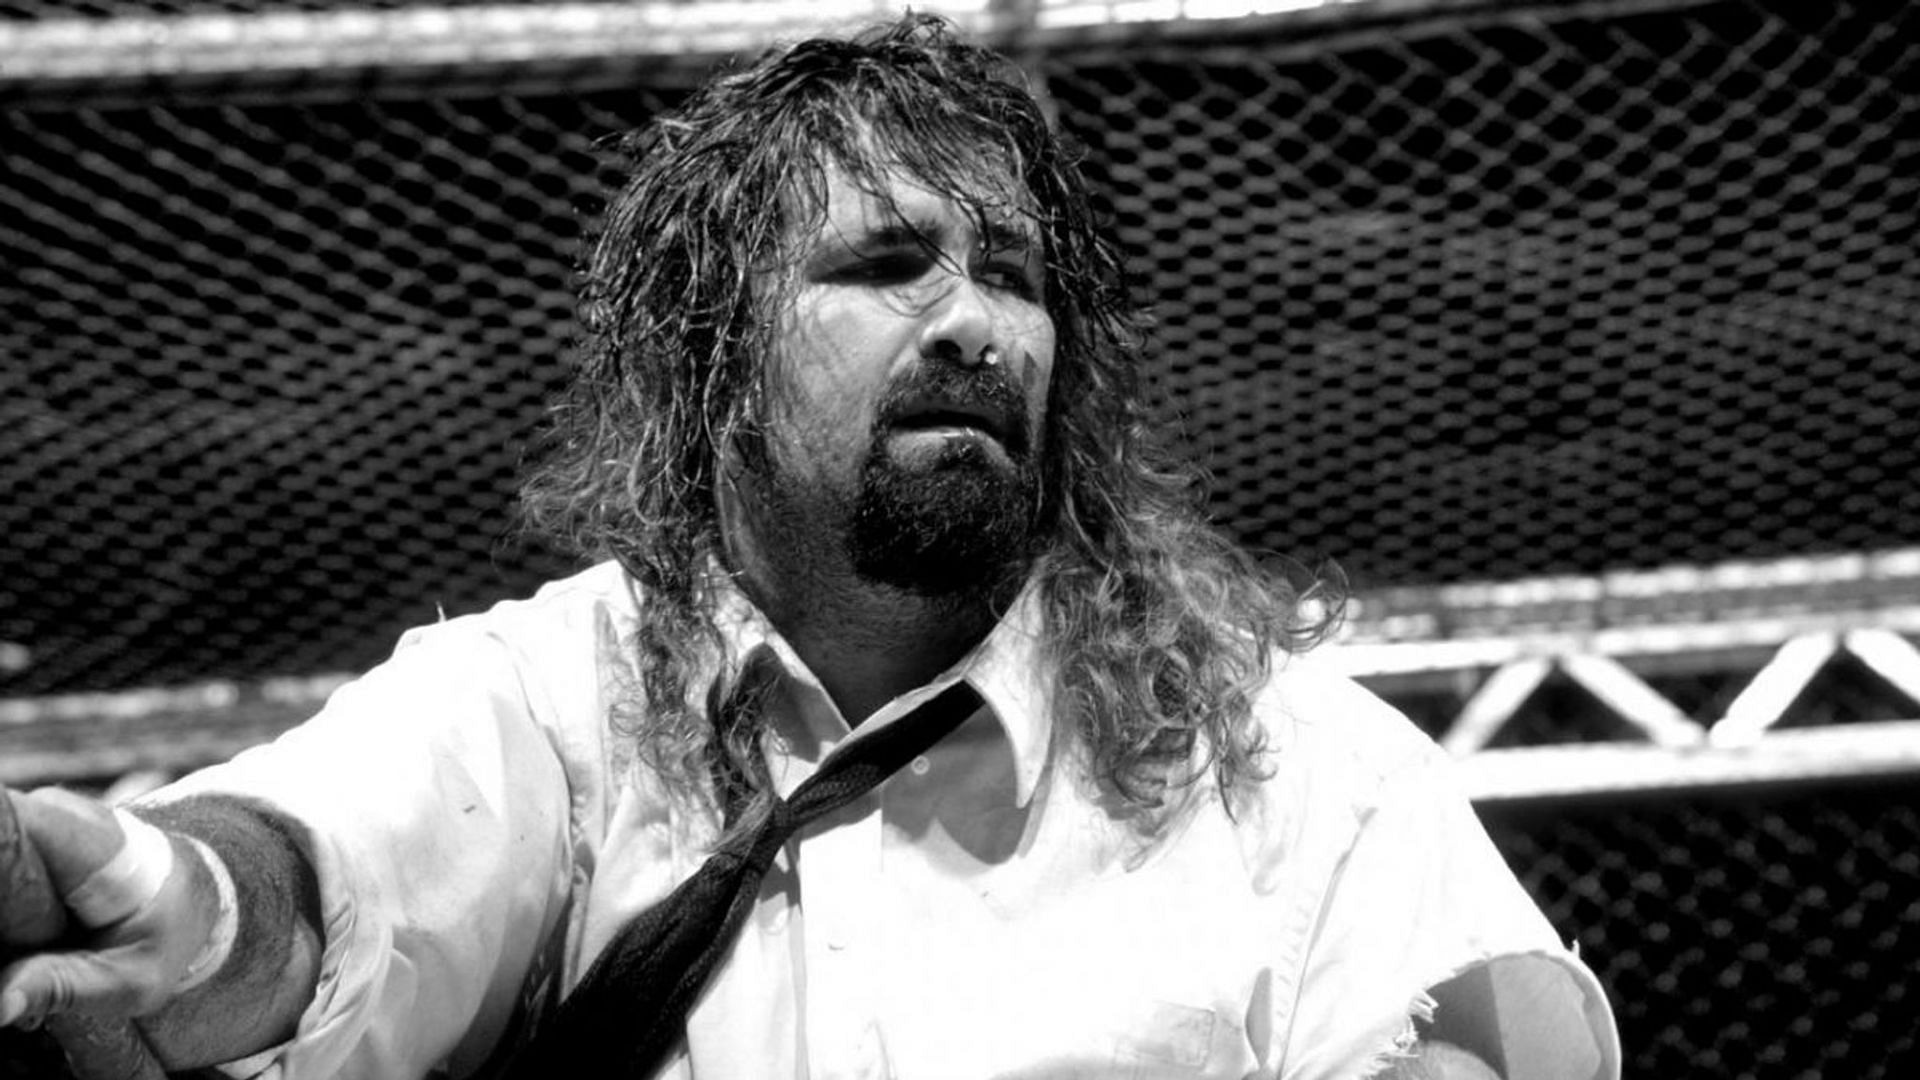 No stranger to dangerous stunts, Mick Foley was once forced to rip off his own ear in order to save his life